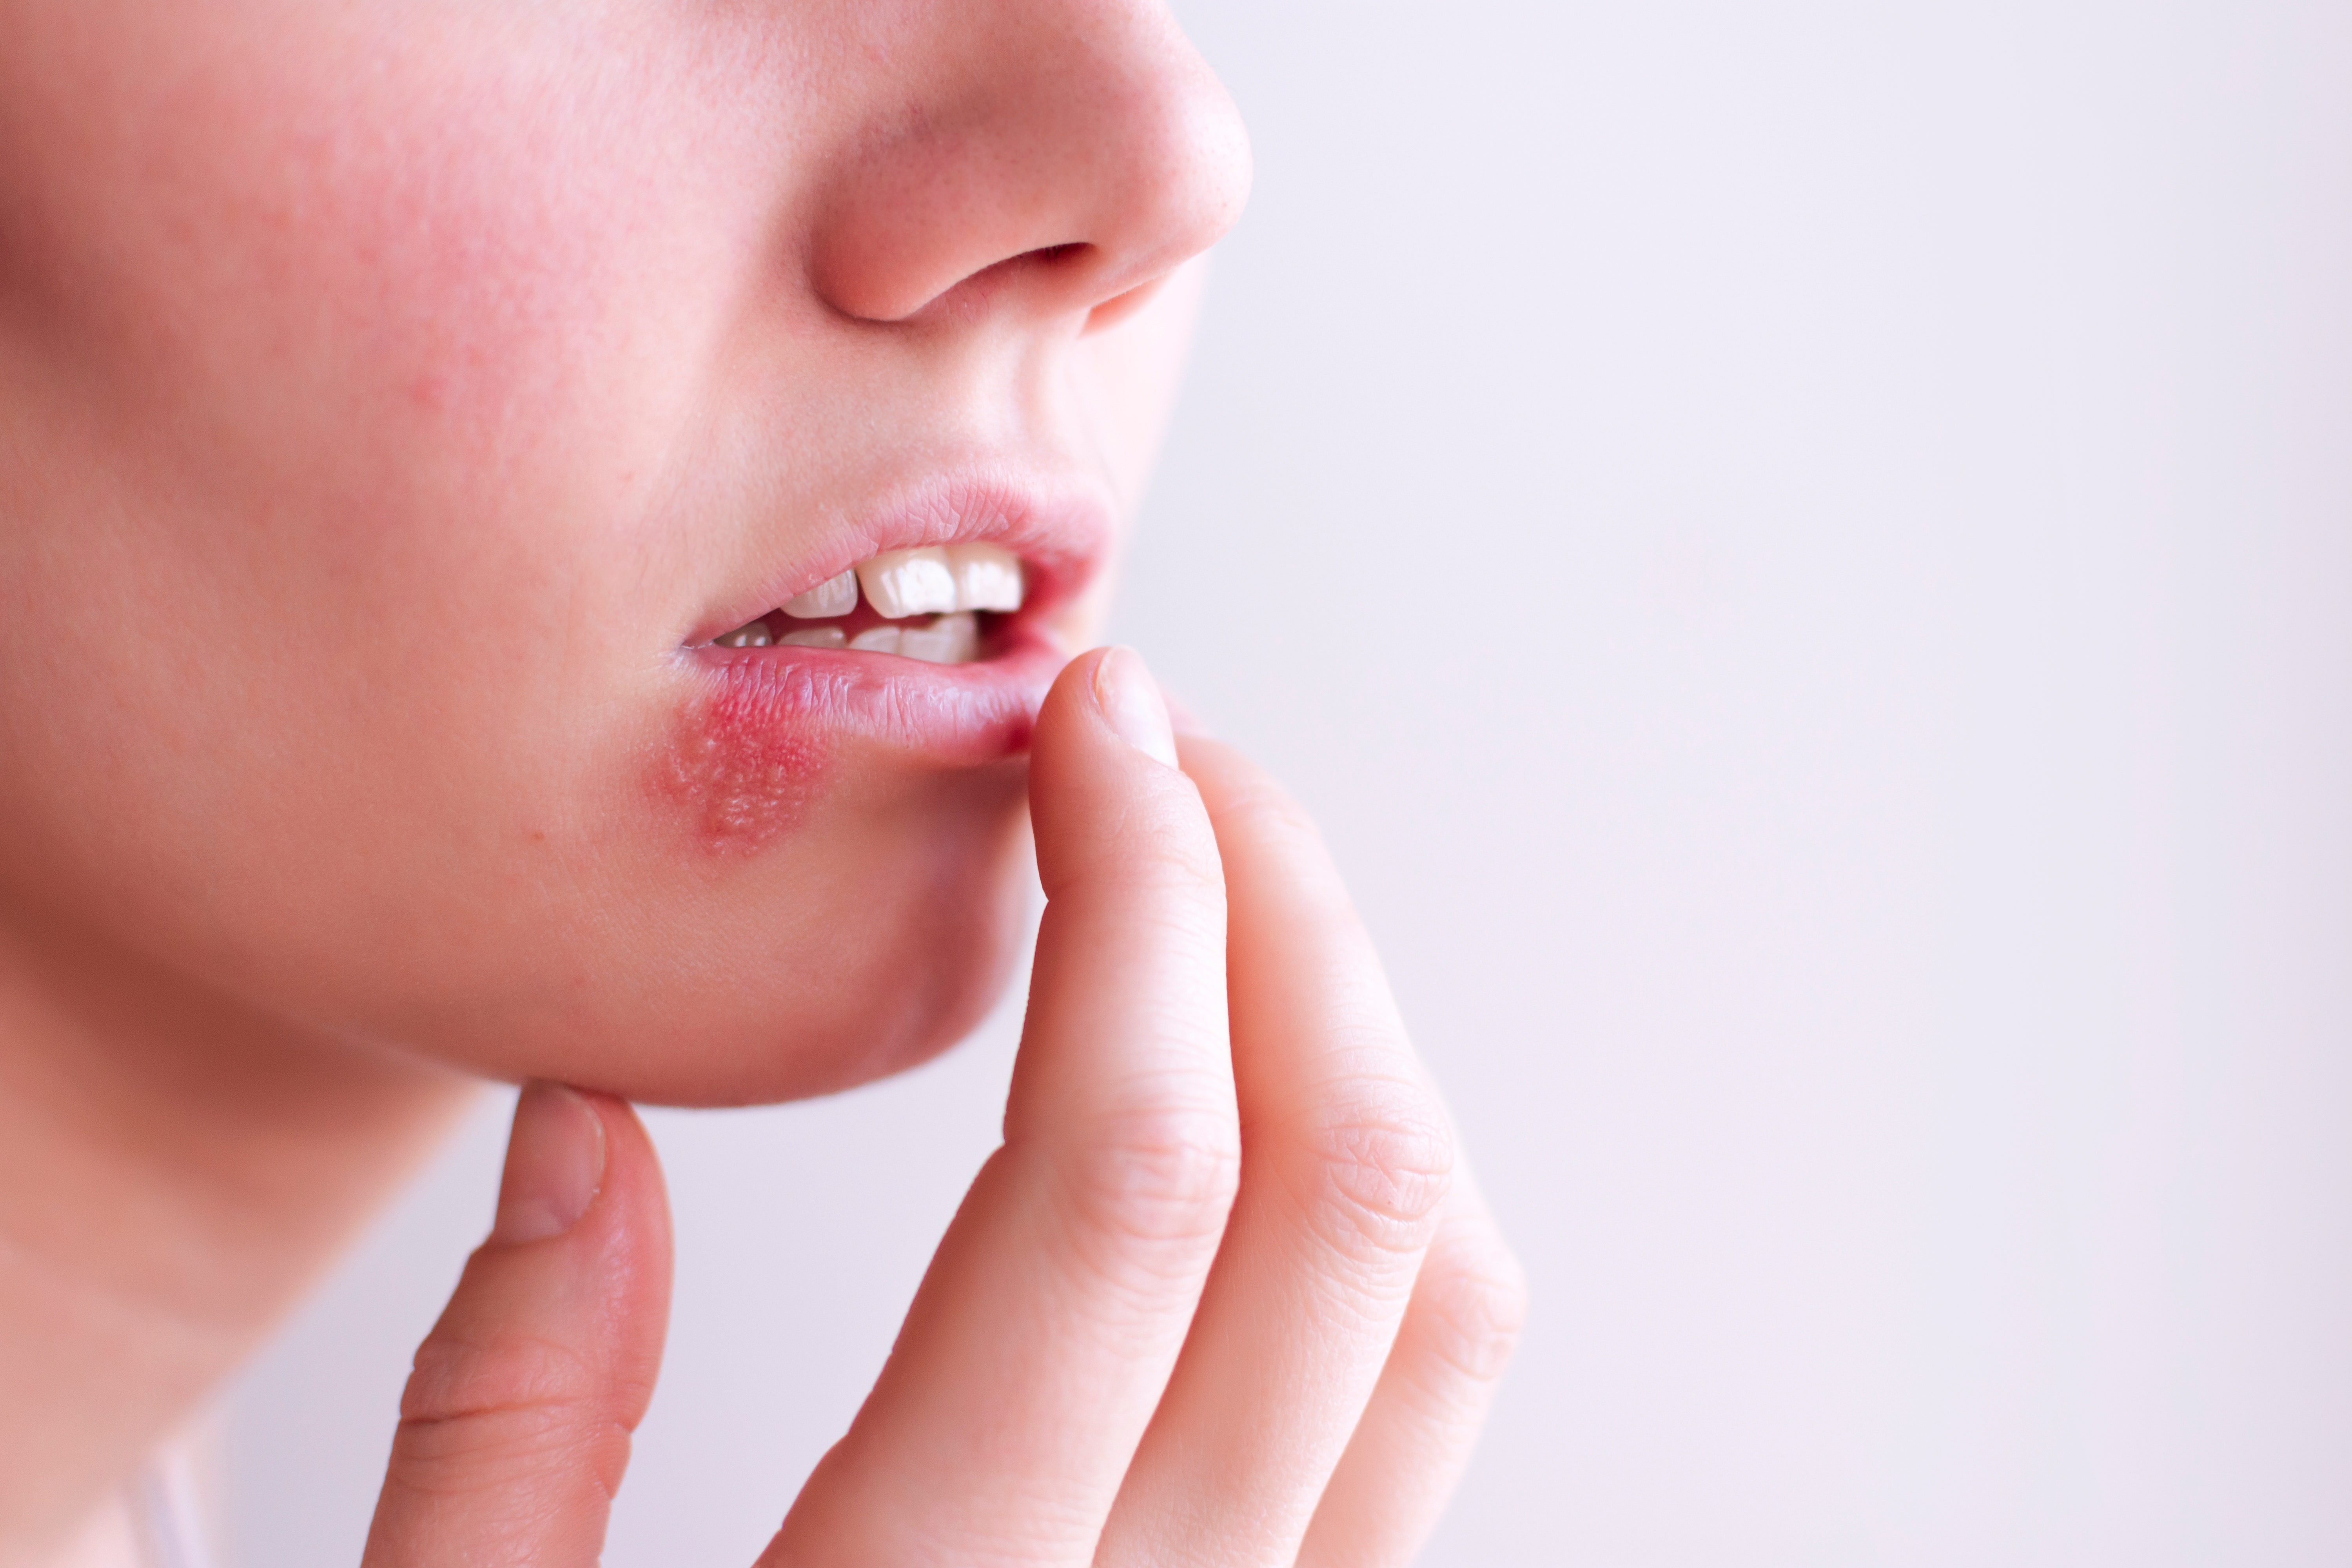 Early signs of facial herpes Herpes simplex